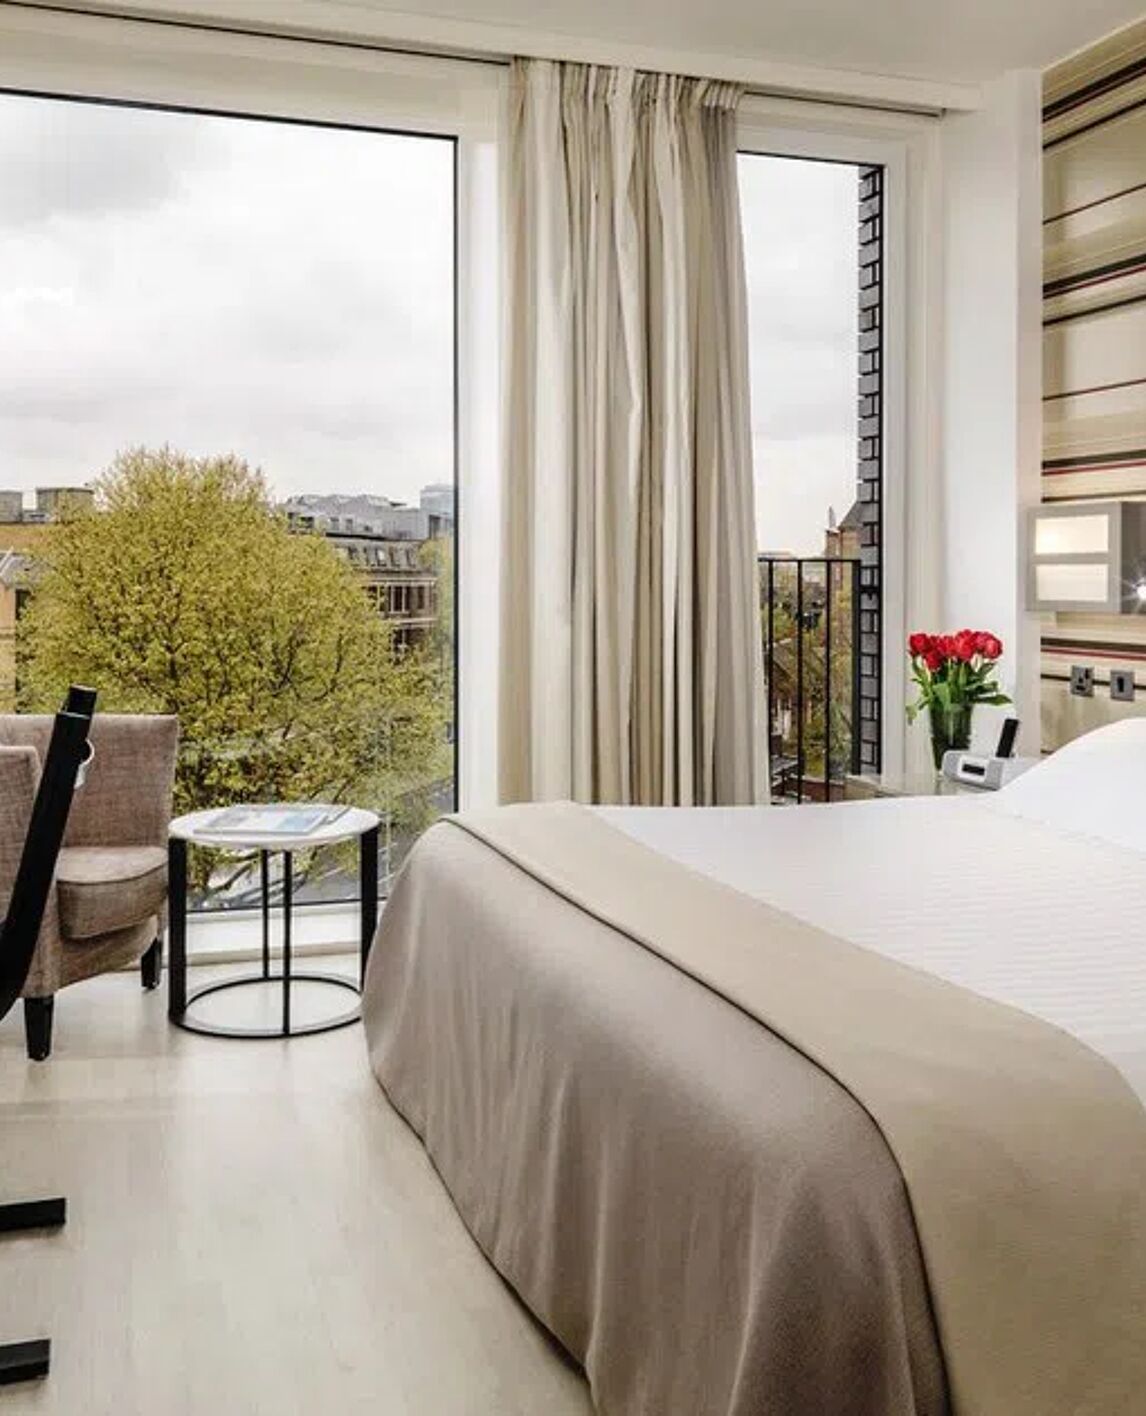 h10-london-waterloo-adults-only